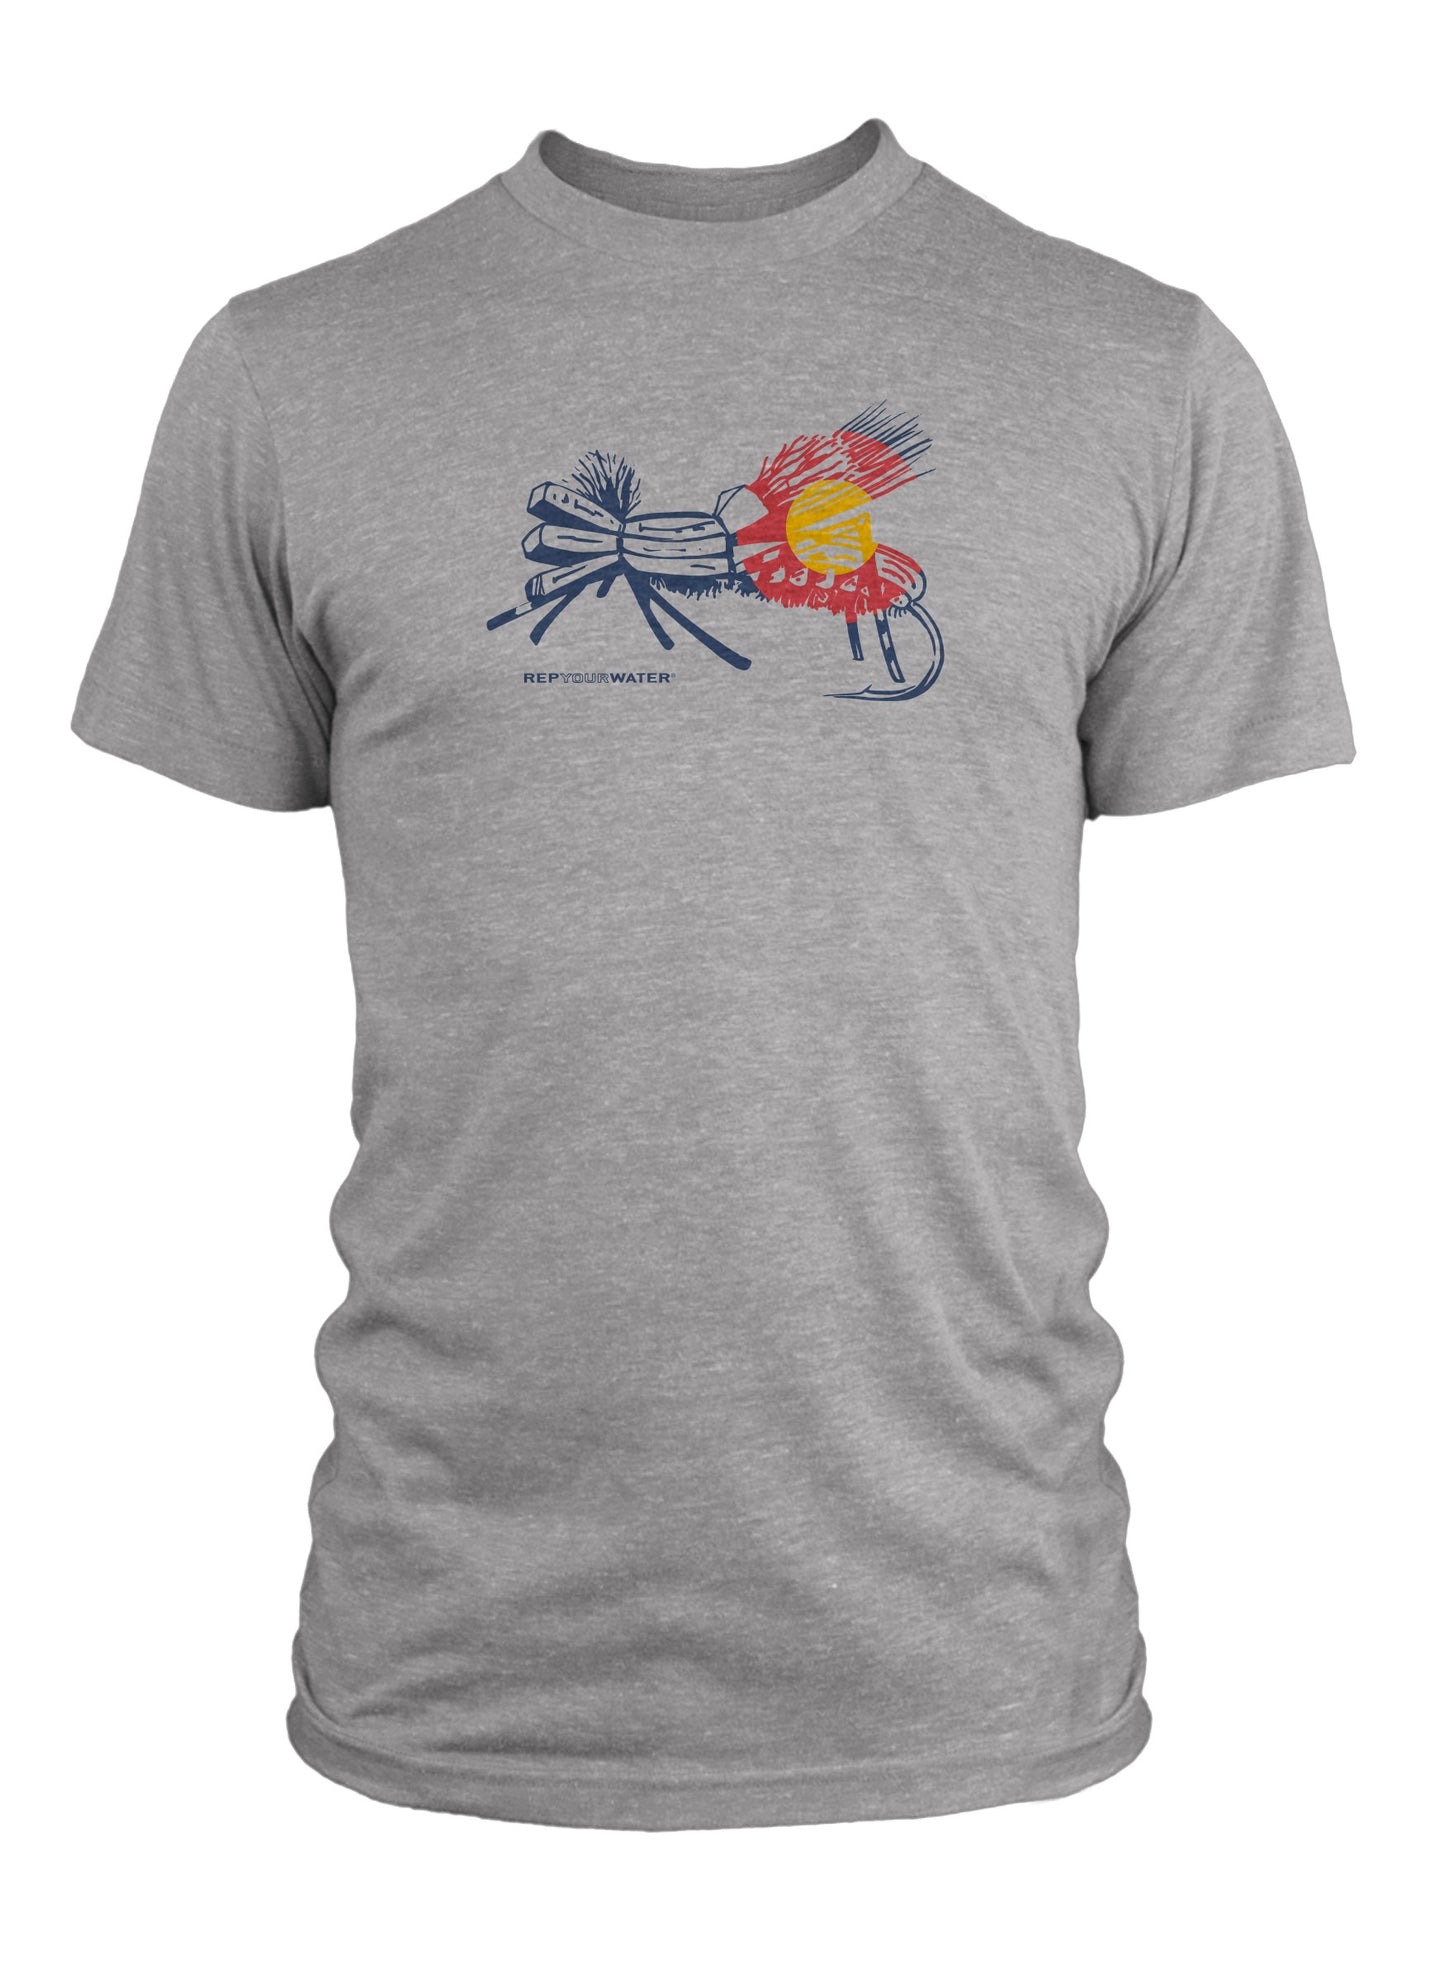 A gray short sleeved tee shirt has a print on the chest in the shape of a grass hoper fly in the colors of the colorado flag it says repyourwater underneath